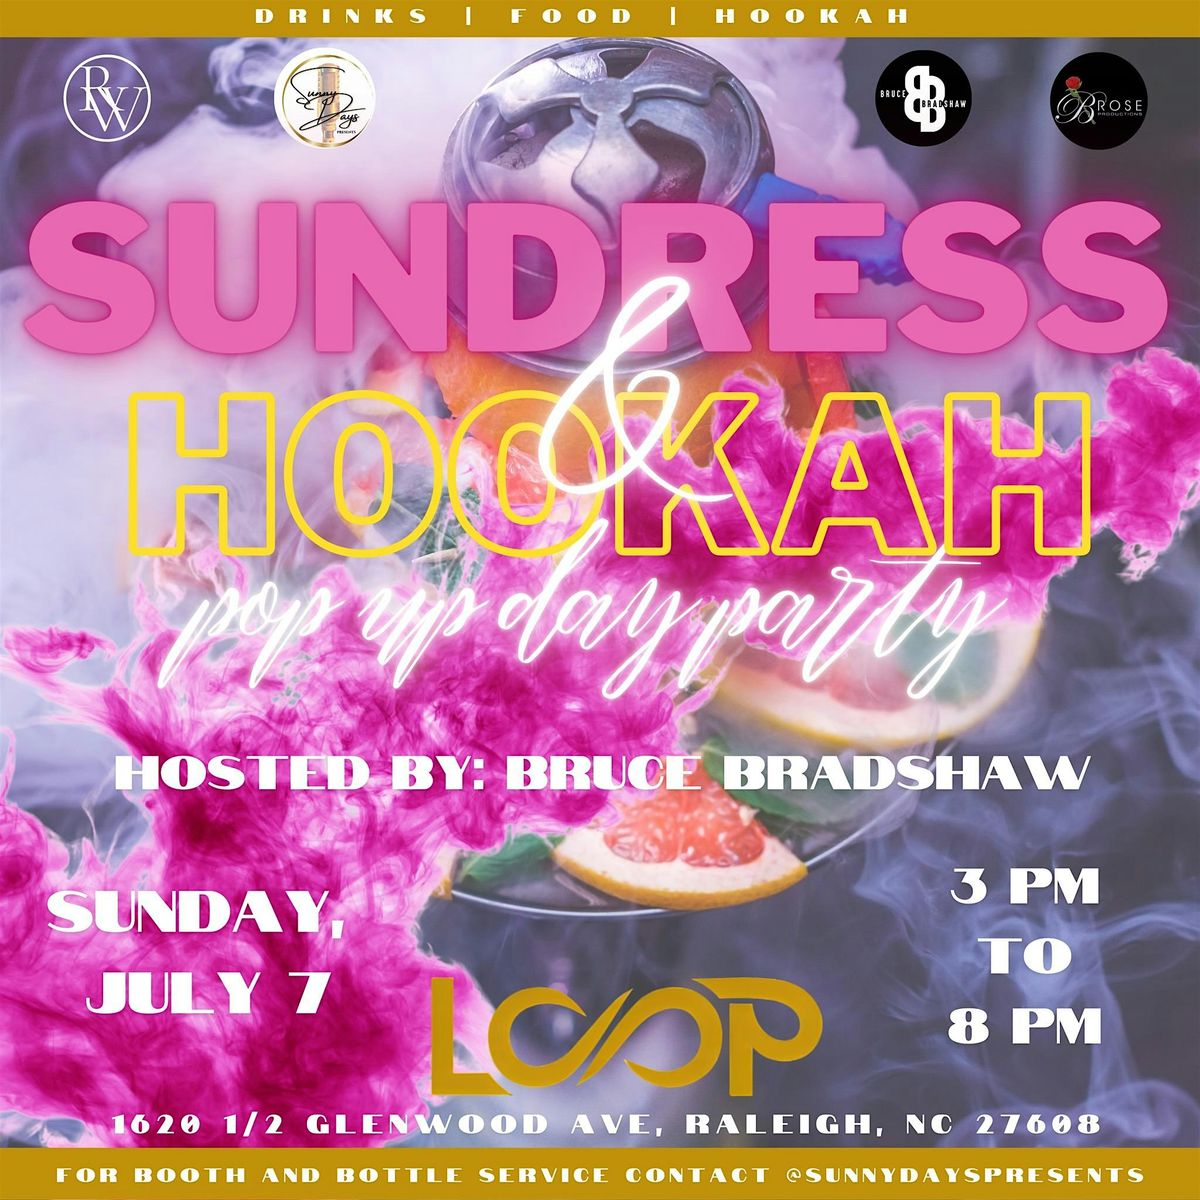 Sundress & Hookah Sunday Day Party! The 4th of July Finale!